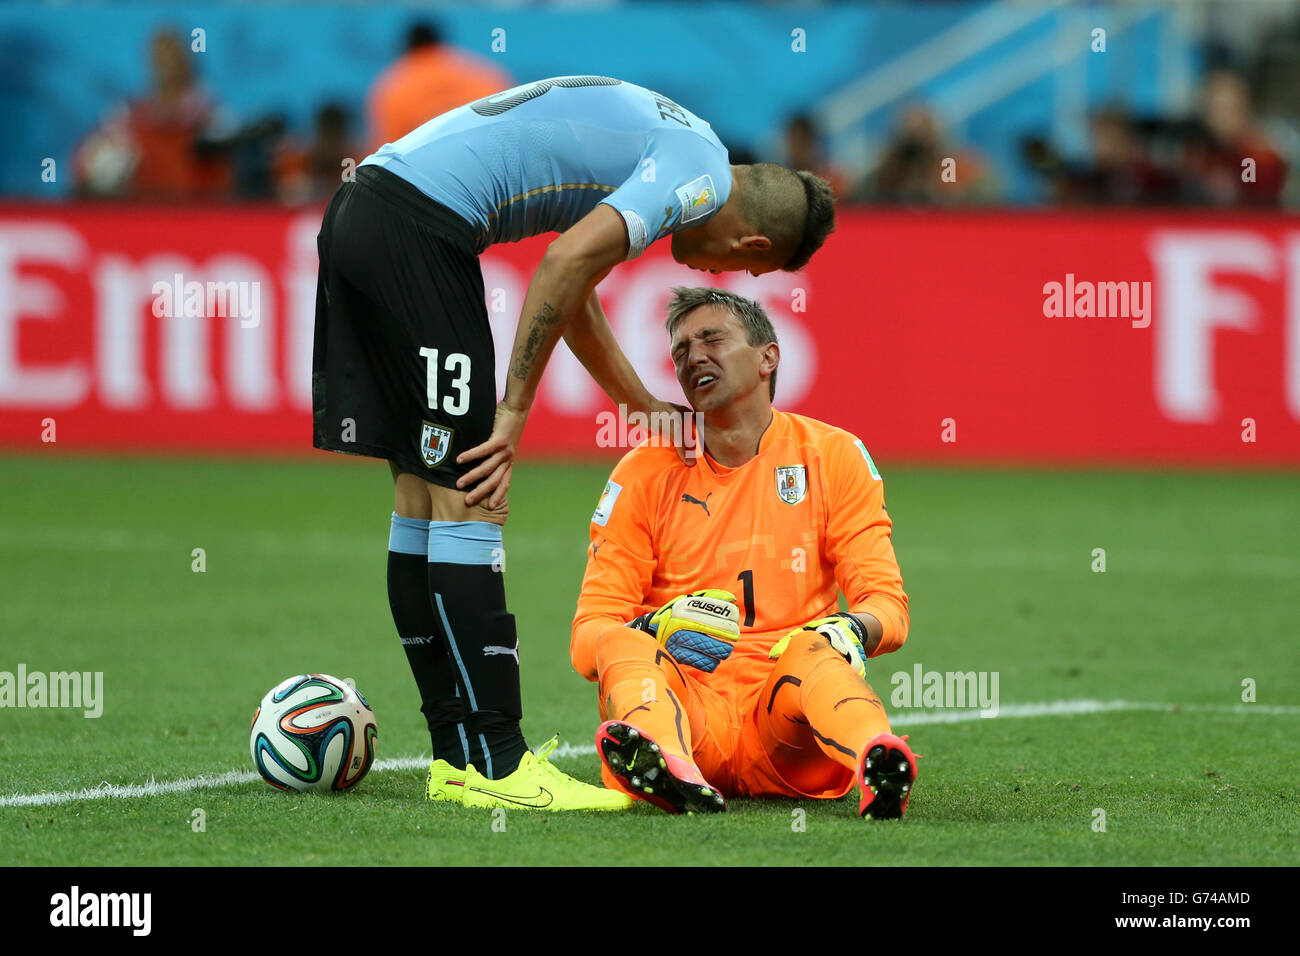 Uruguay goalkeeper Fernando Muslera (right) reacts after a coming together with England's Danny Welbeck during the Group D match the Estadio do Sao Paulo, Sao Paulo, Brazil. Stock Photo